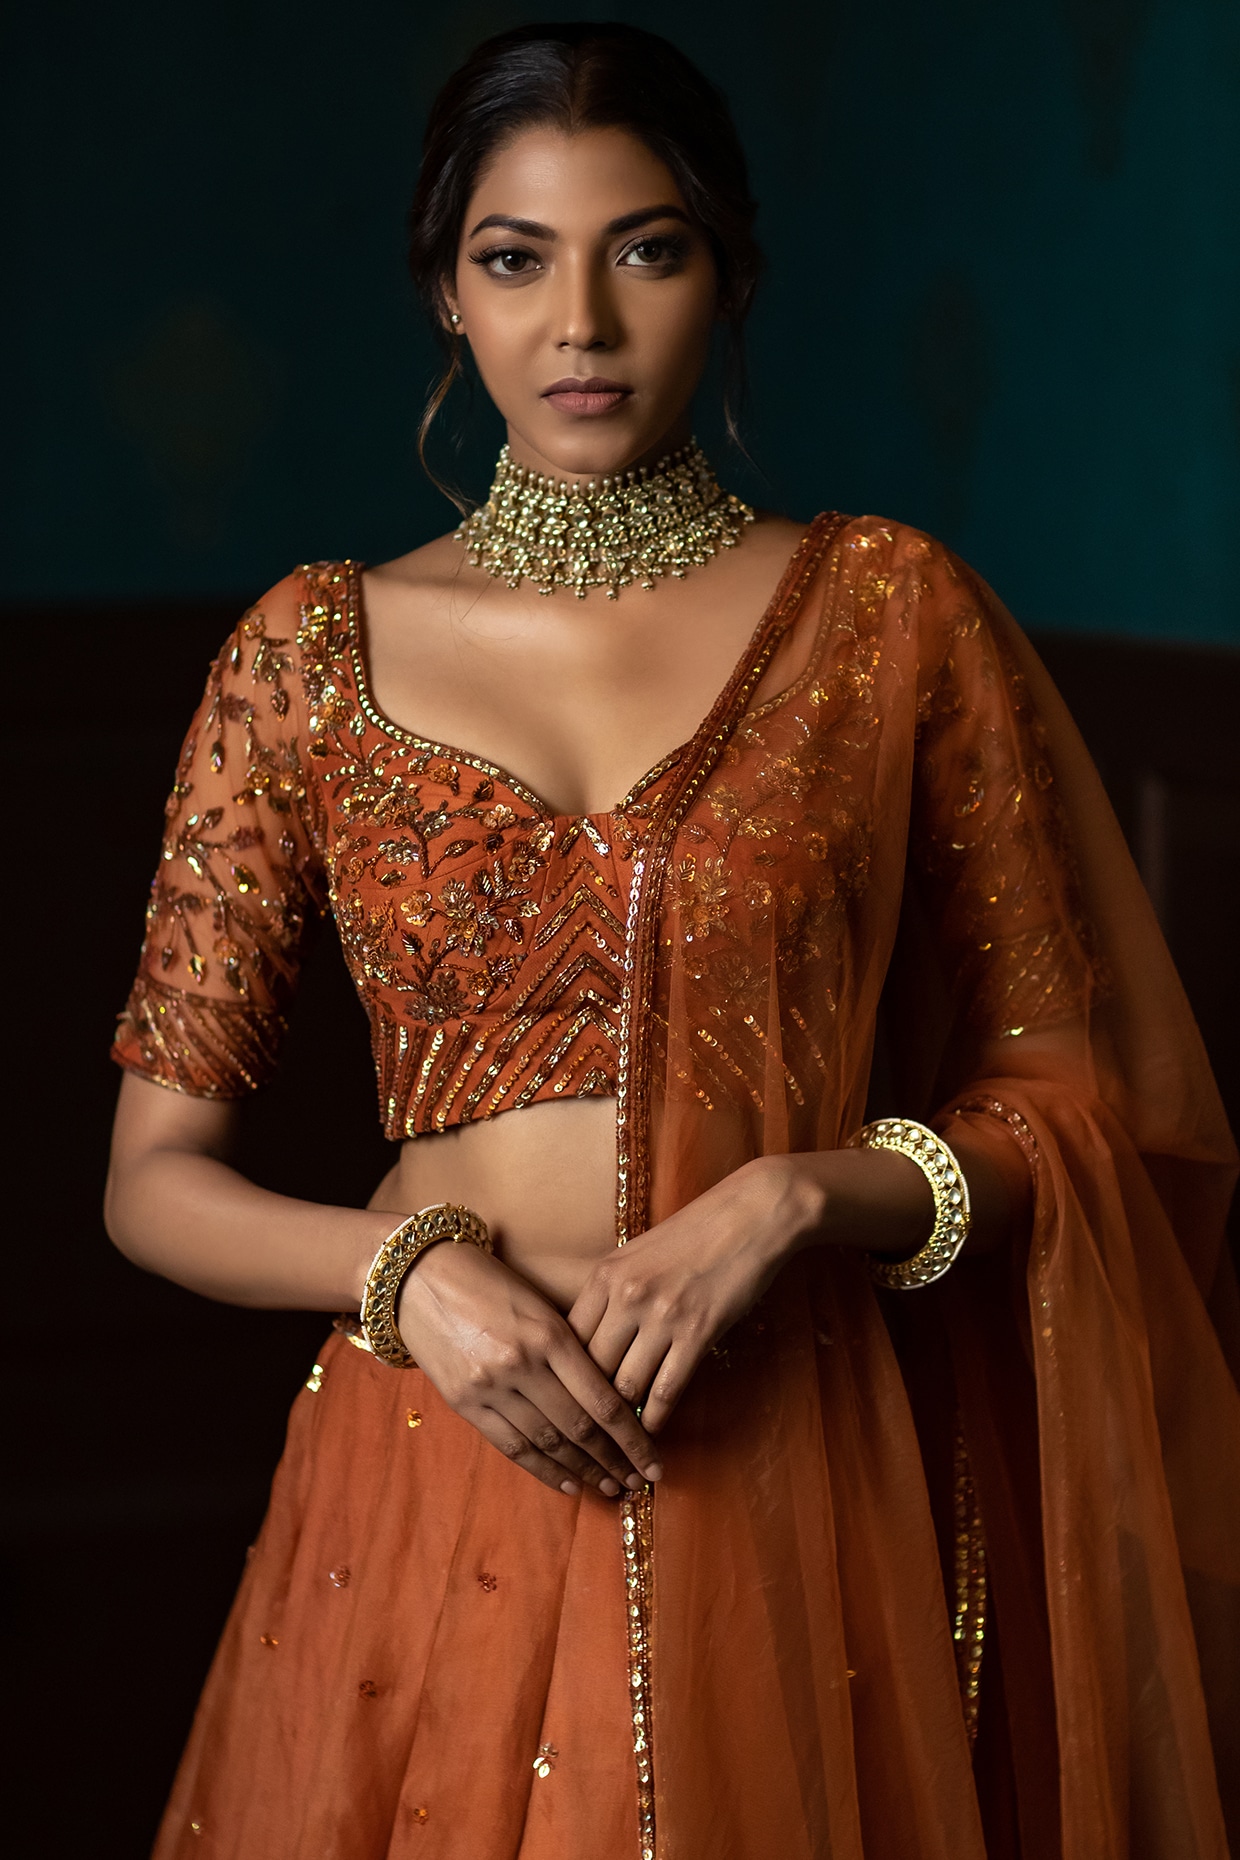 Red Lehenga and Jewelry Combinations you can't go wrong with!